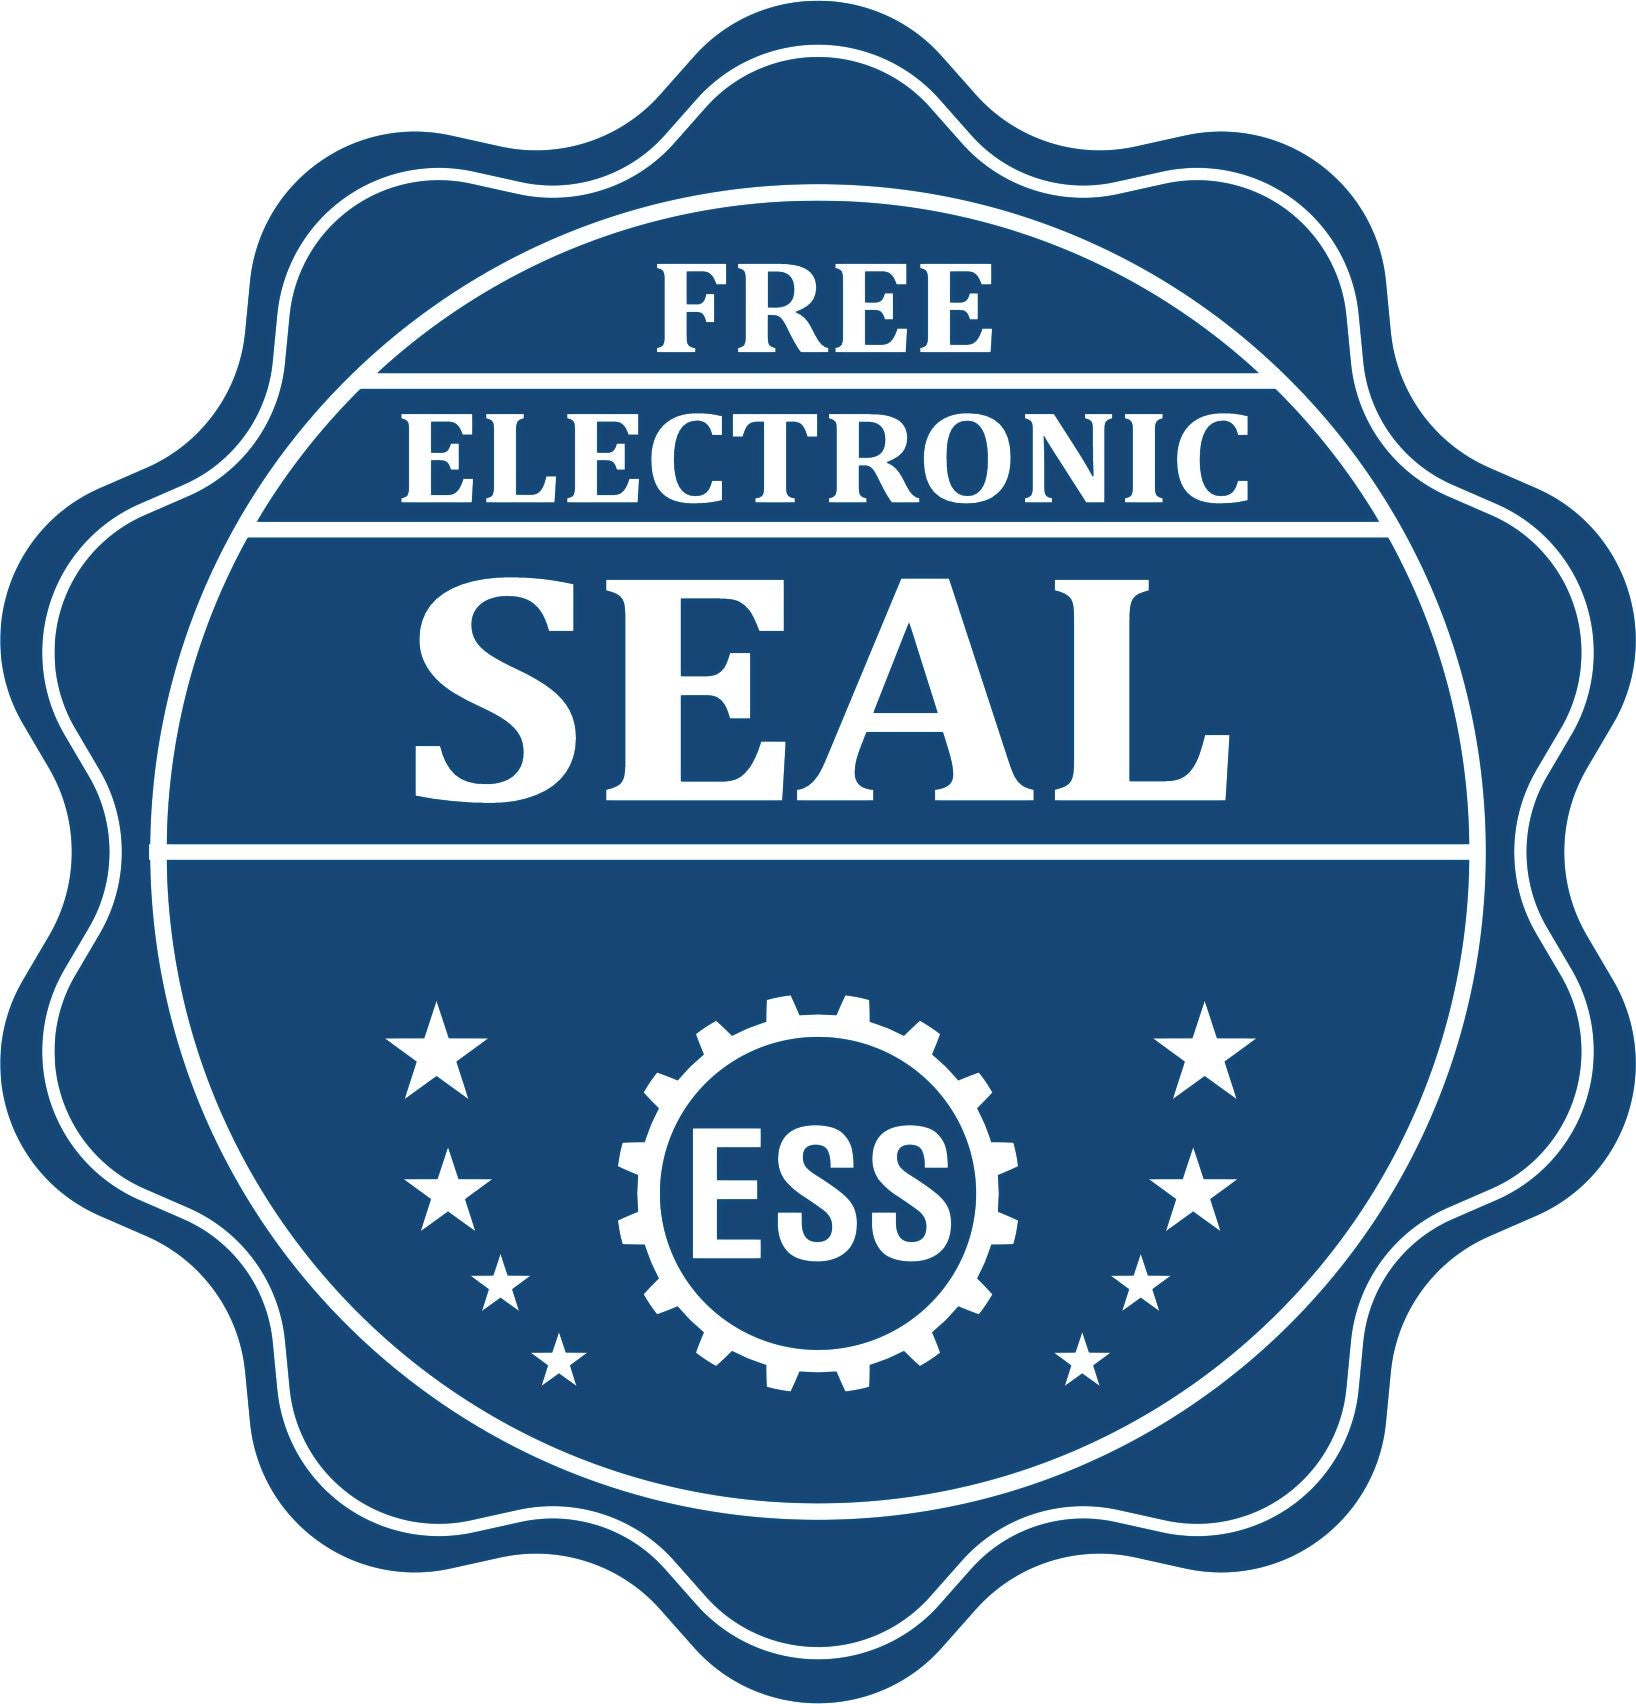 A badge showing a free electronic seal for the Heavy Duty Cast Iron Indiana Geologist Seal Embosser with stars and the ESS gear on the emblem.